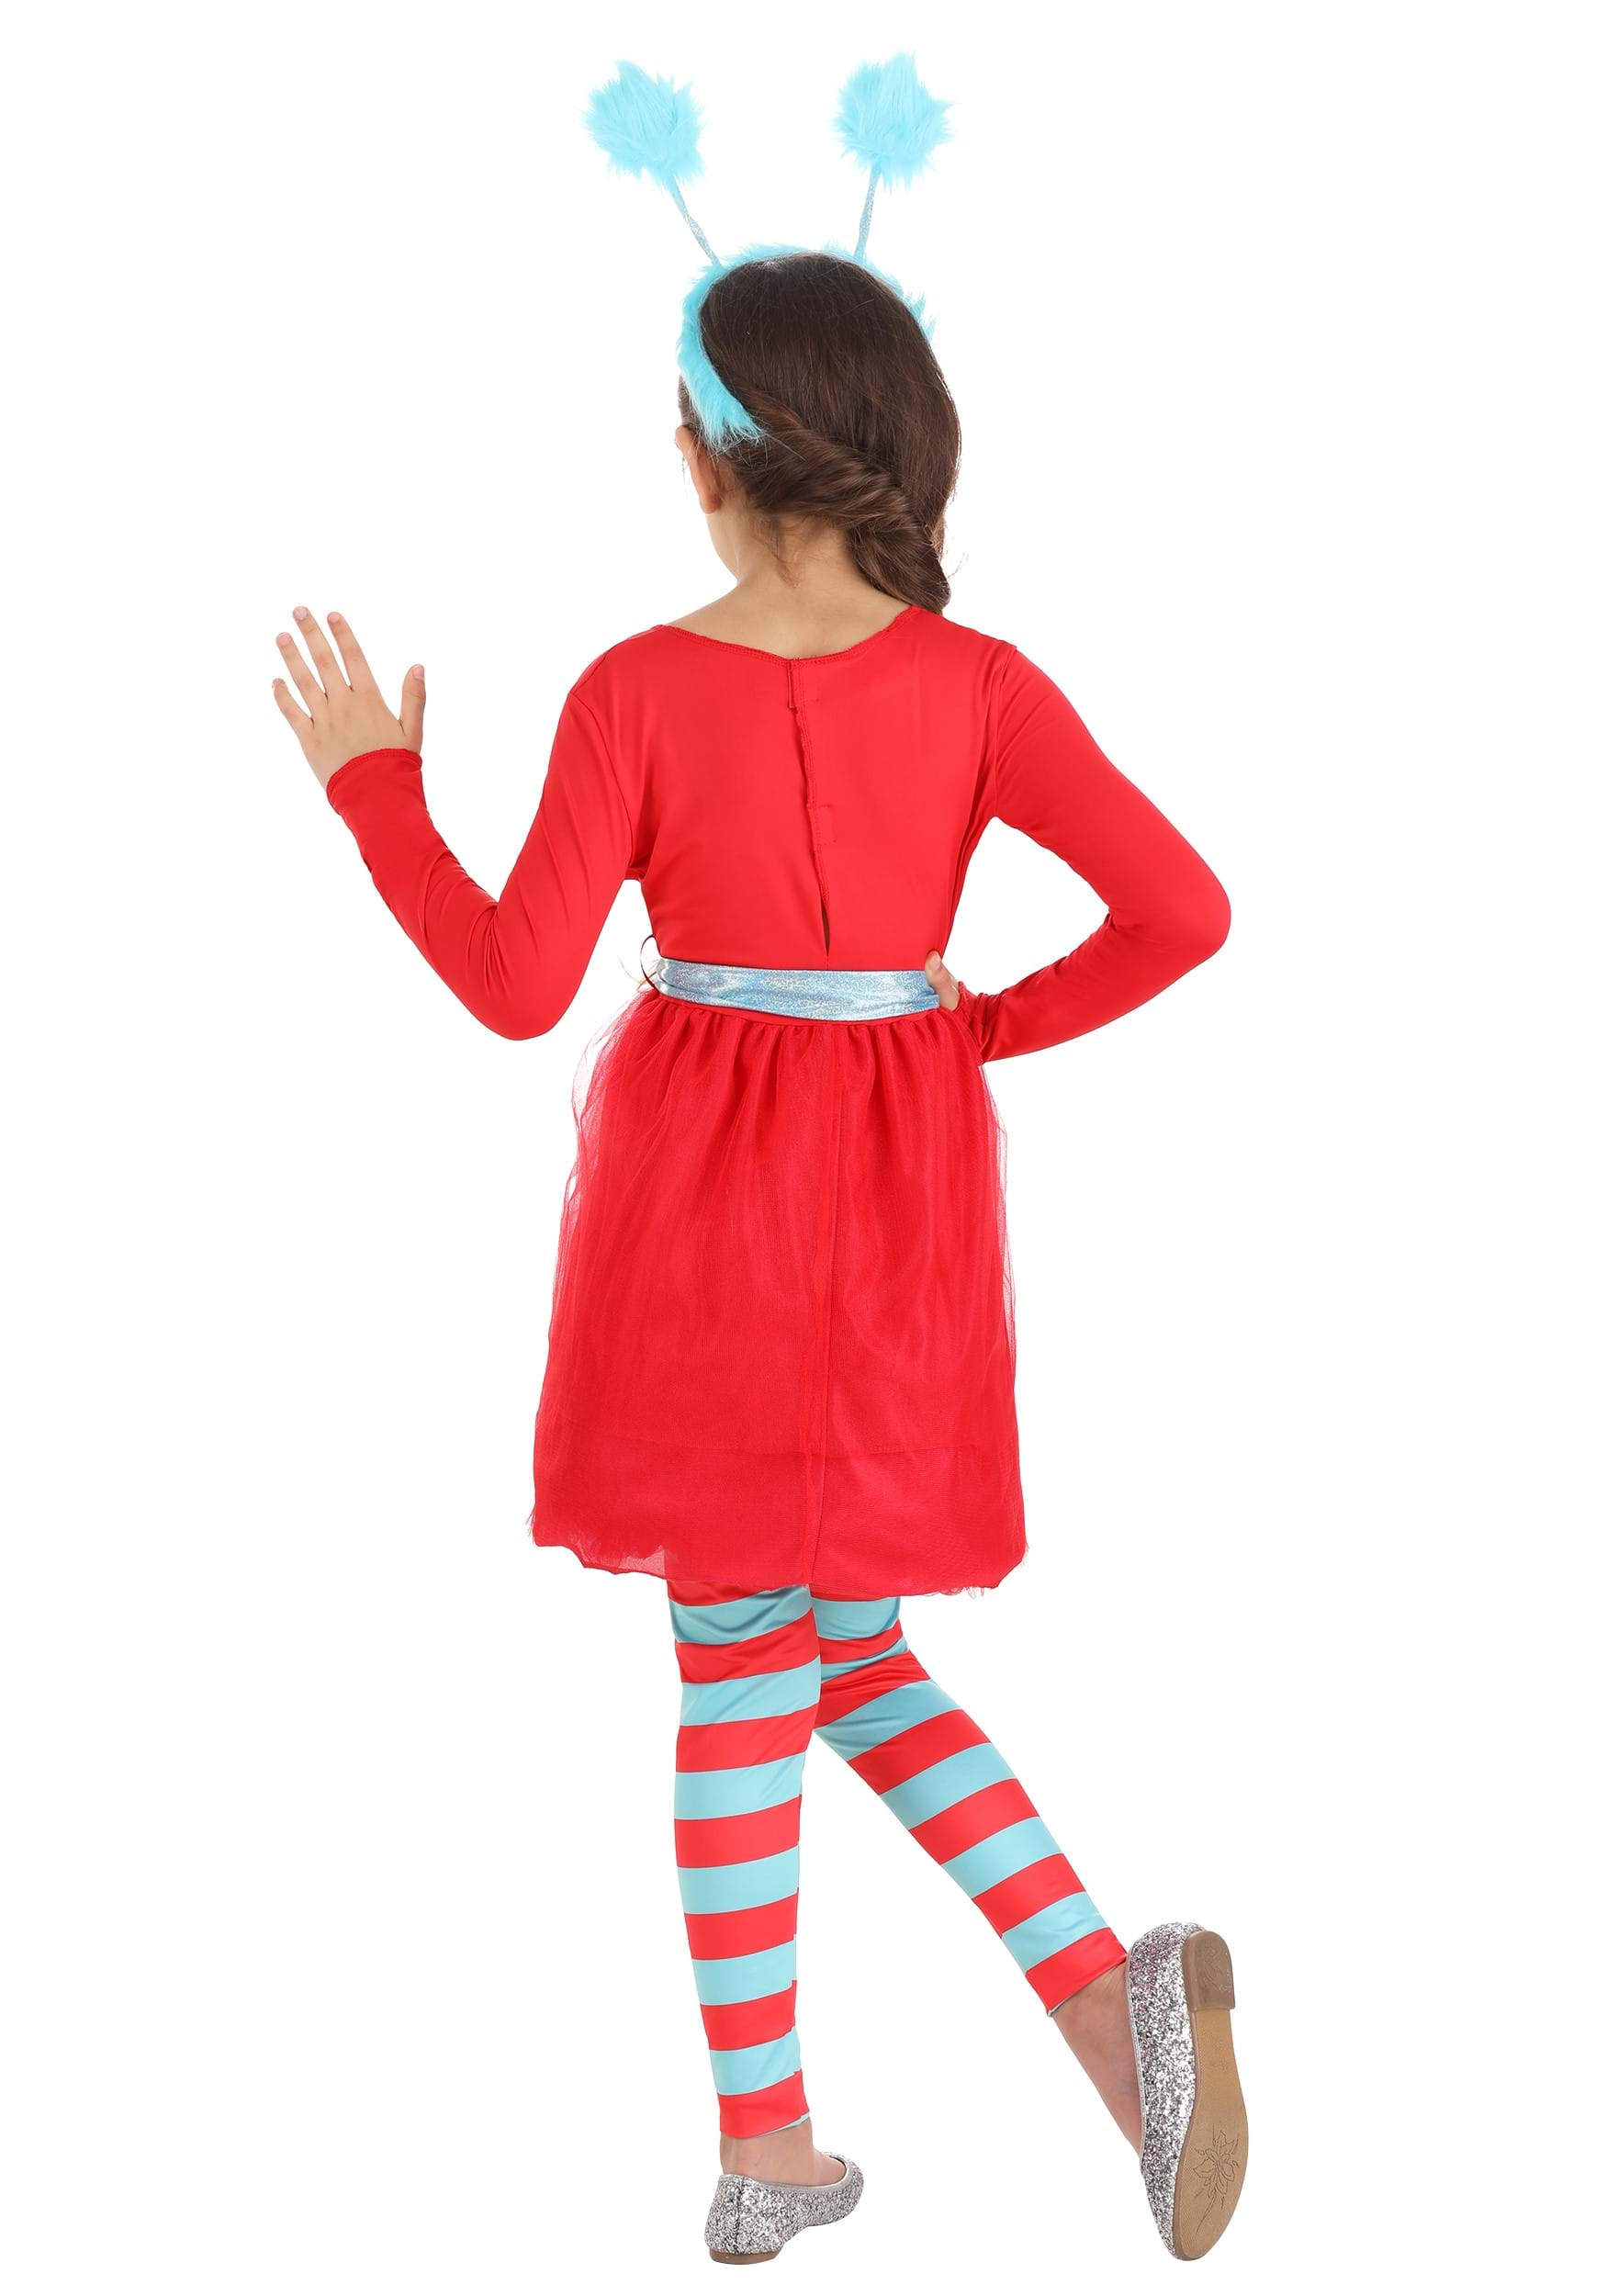 Seuss Thing 1 & Thing 2 Leggings Child Size 3-6 One Size Fits Kost BRAND NEW Dr